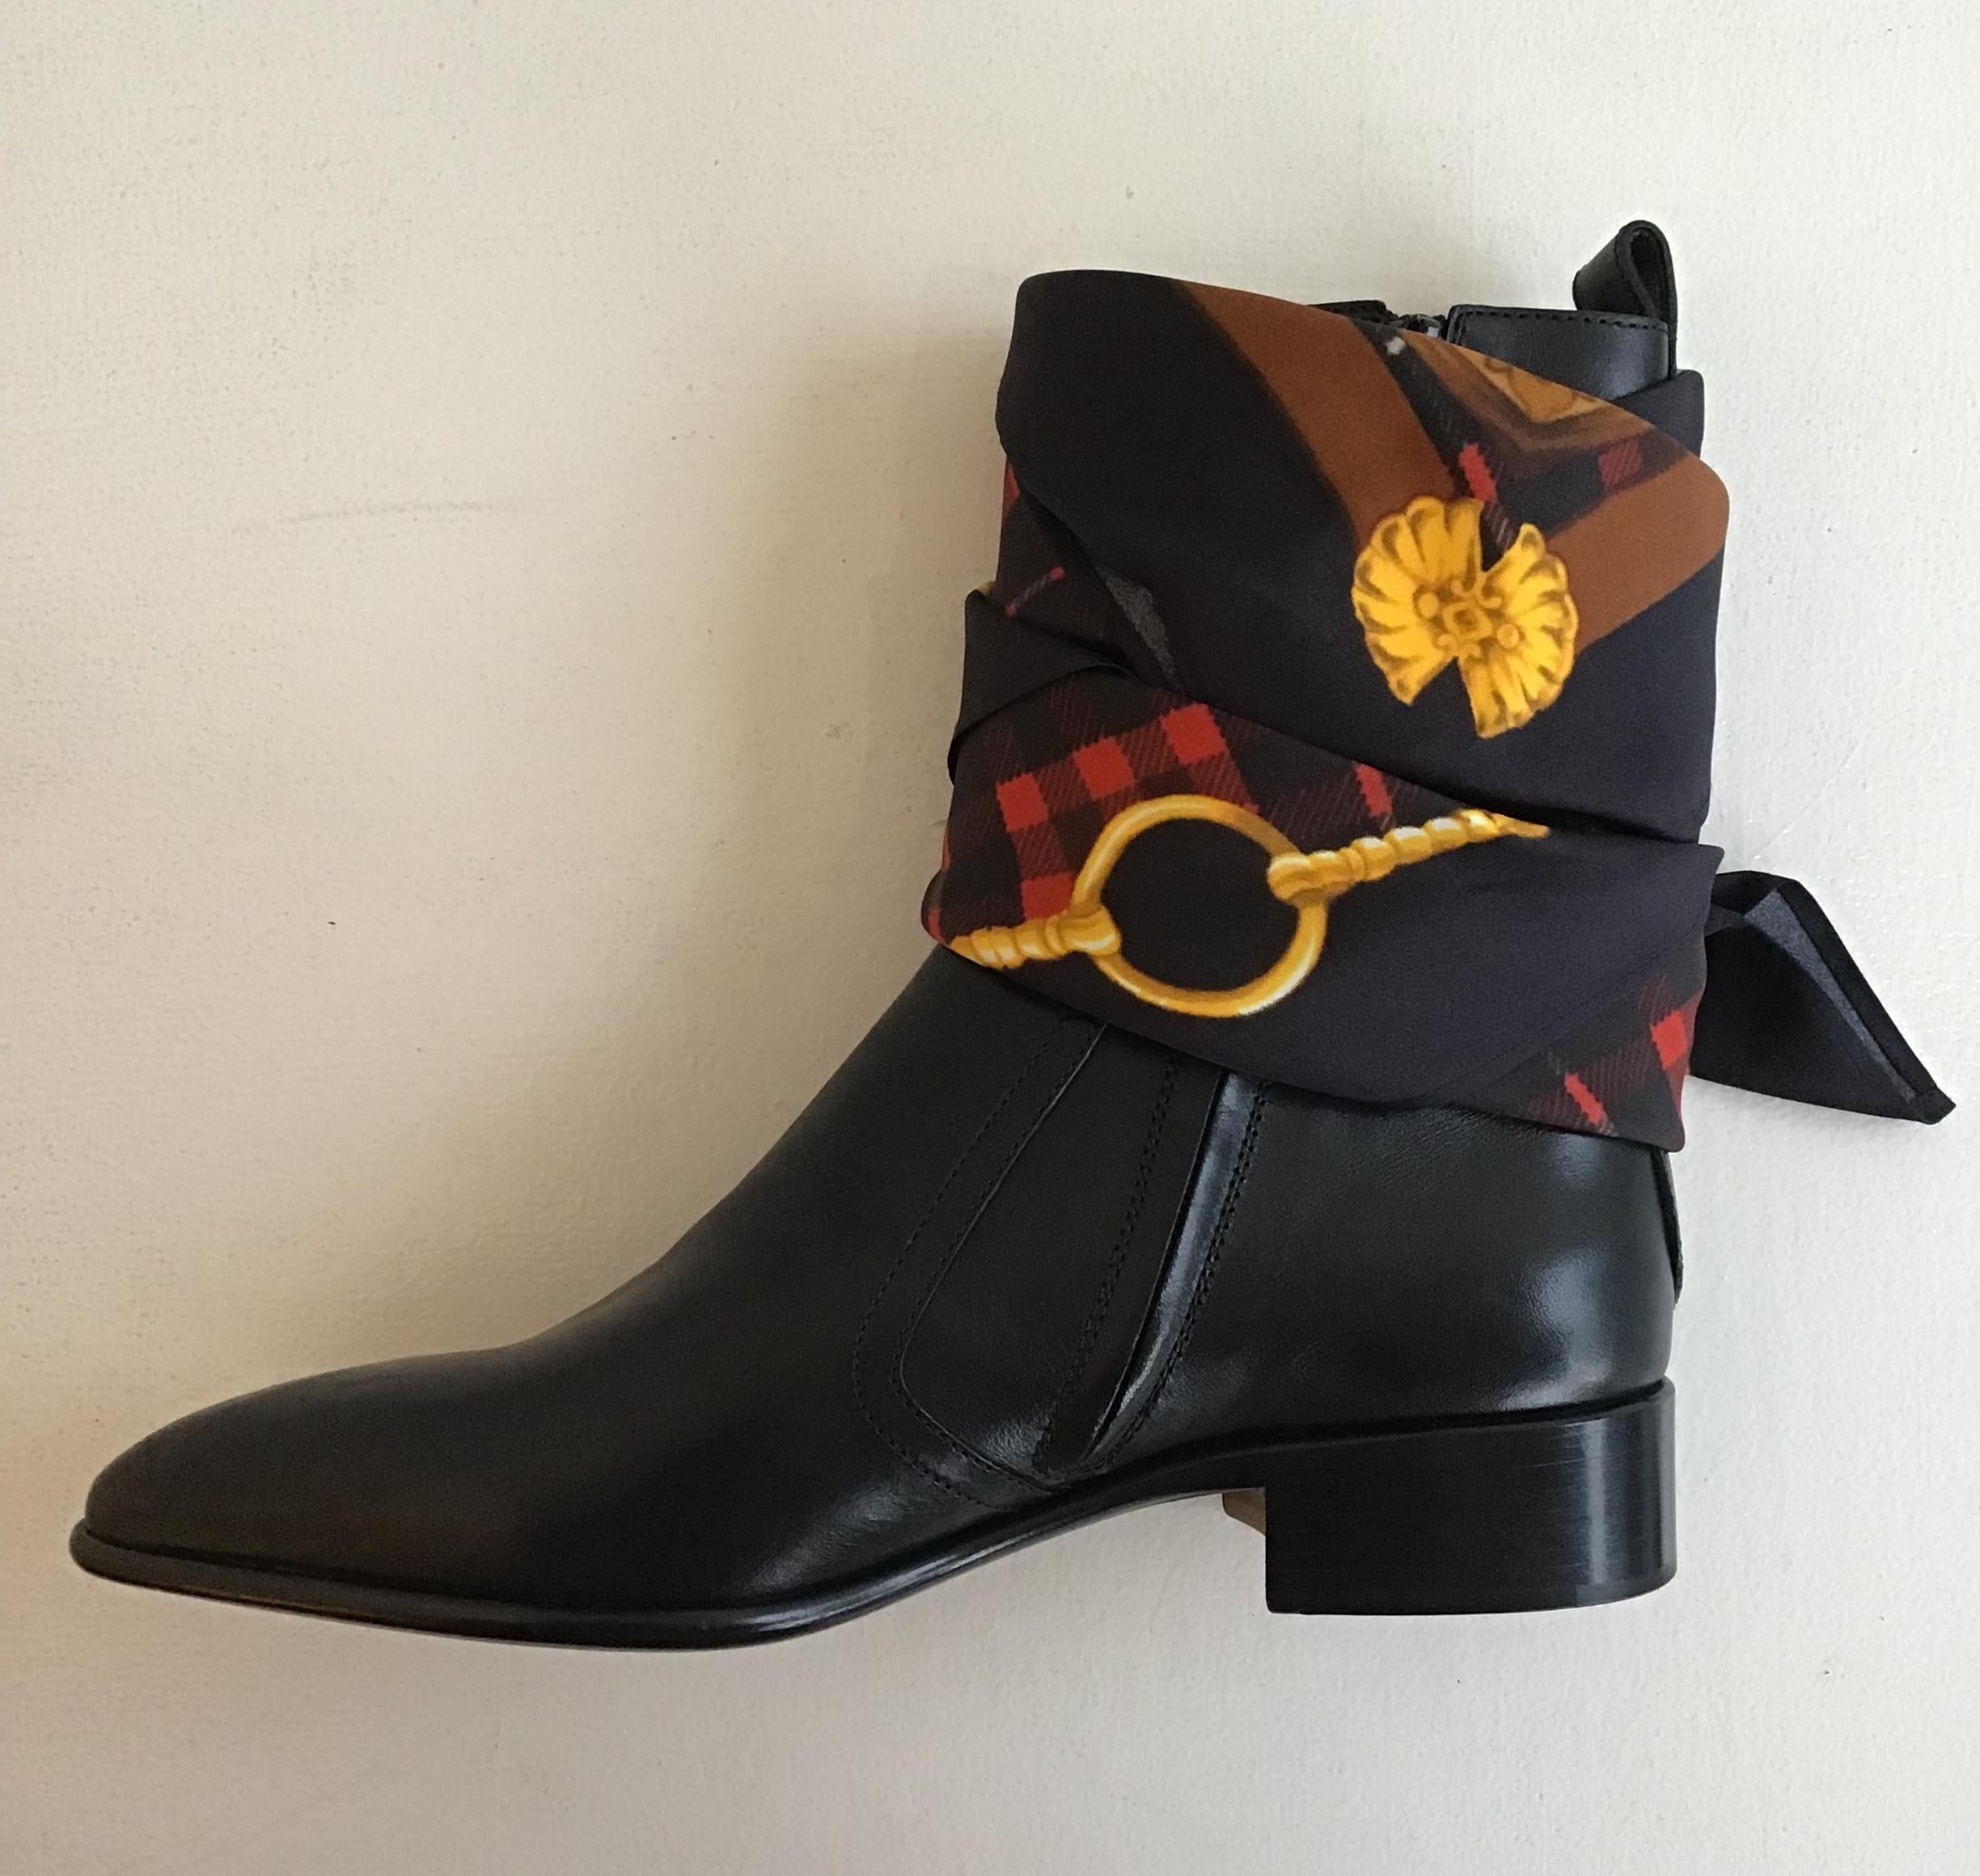 Maison Margiela Black Leather Scarf Ankle Boots In Excellent Condition For Sale In San Francisco, CA